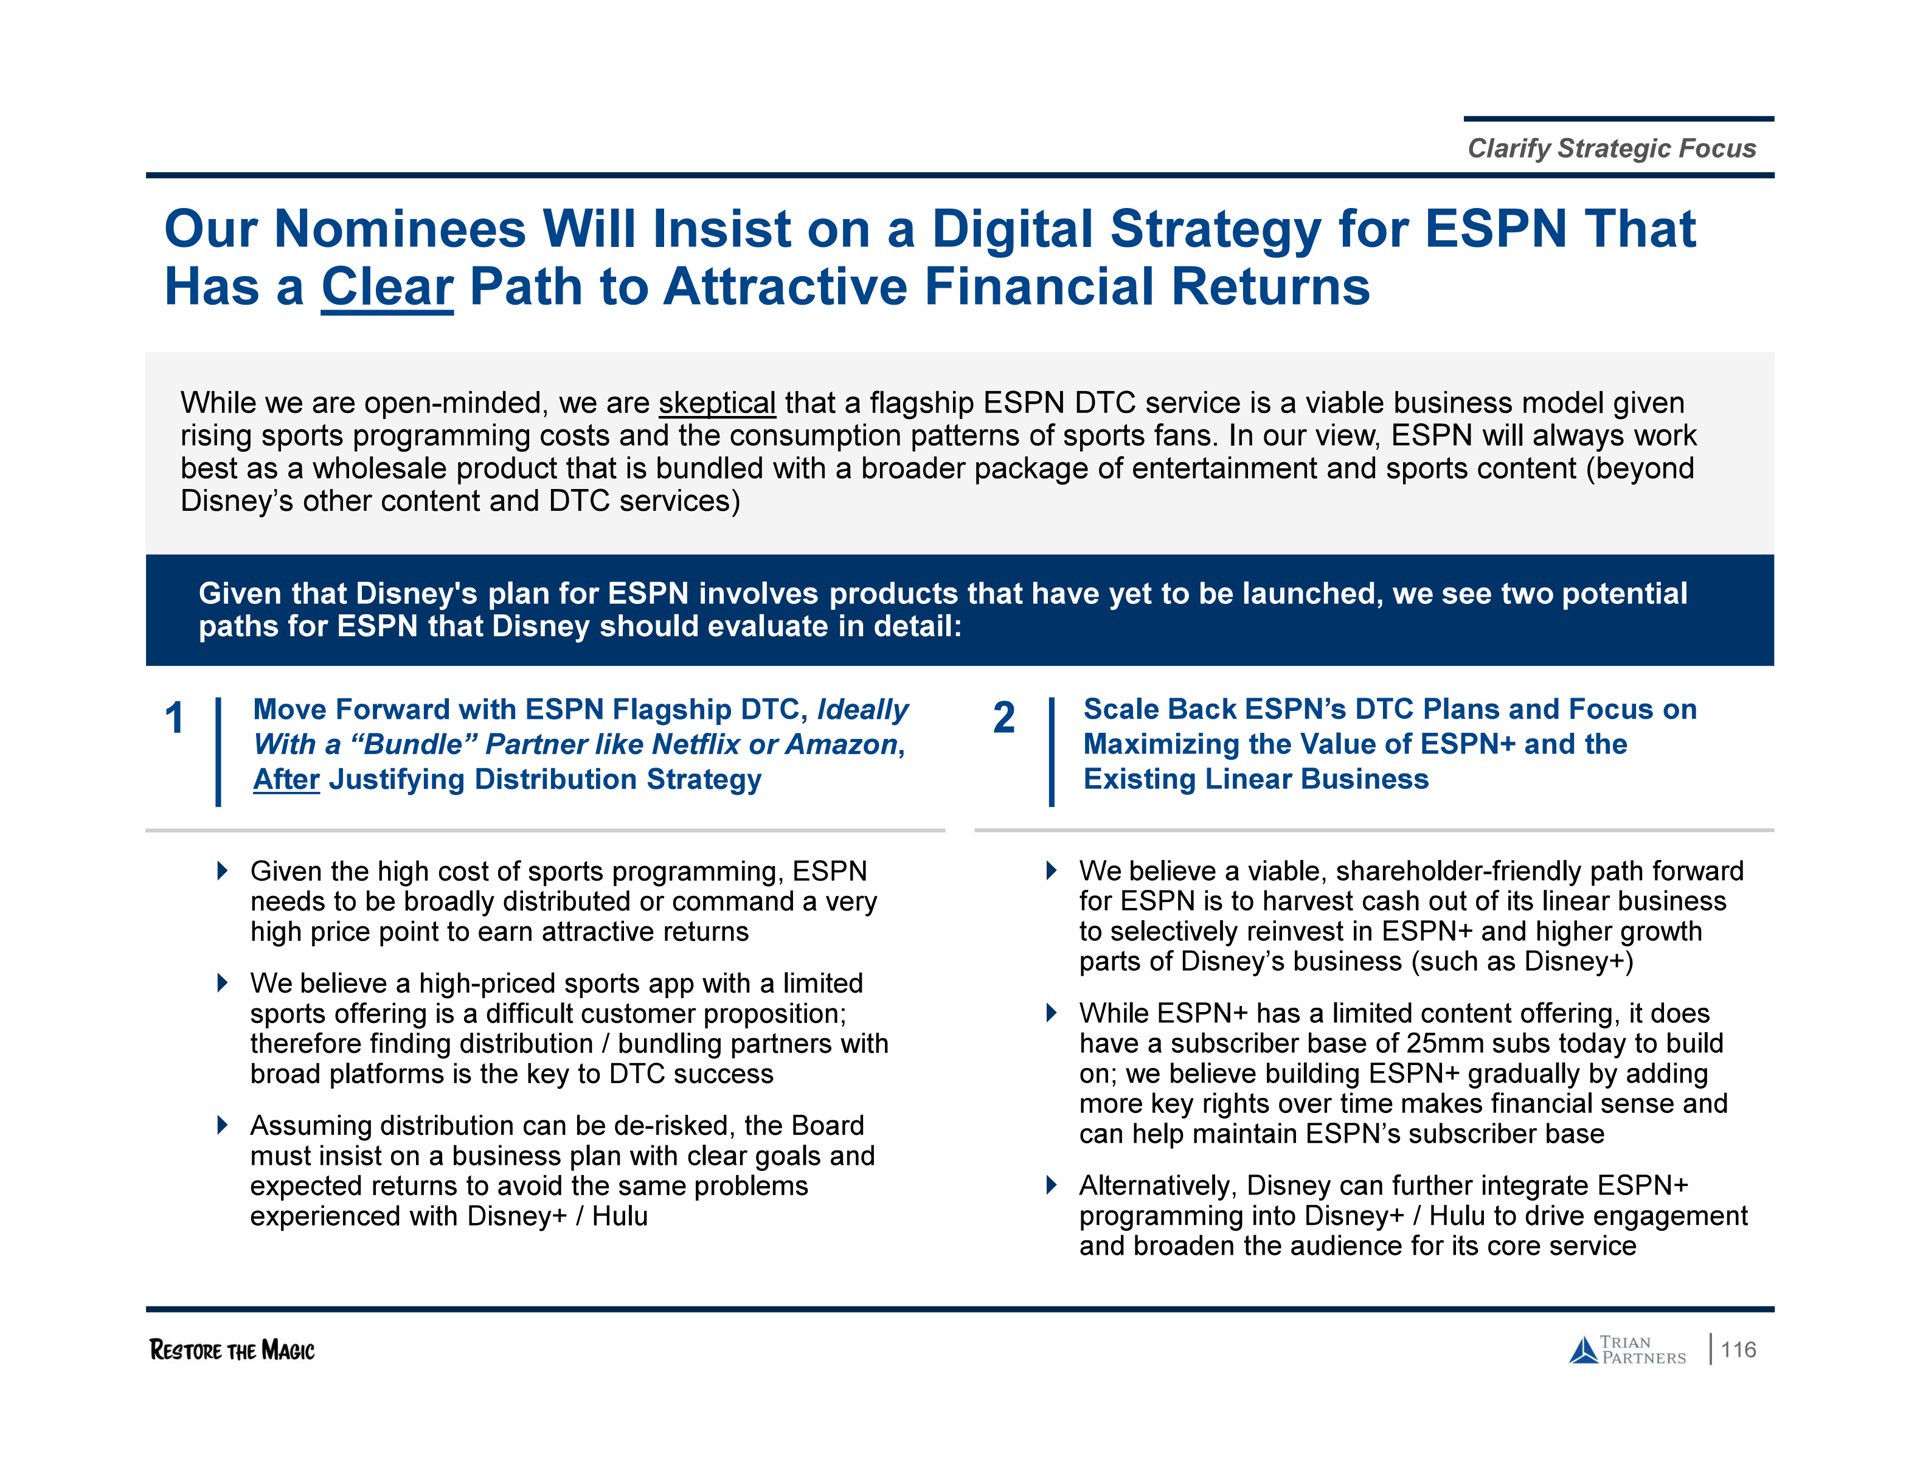 our nominees will insist on a digital strategy for that has a clear path to attractive financial returns | Trian Partners